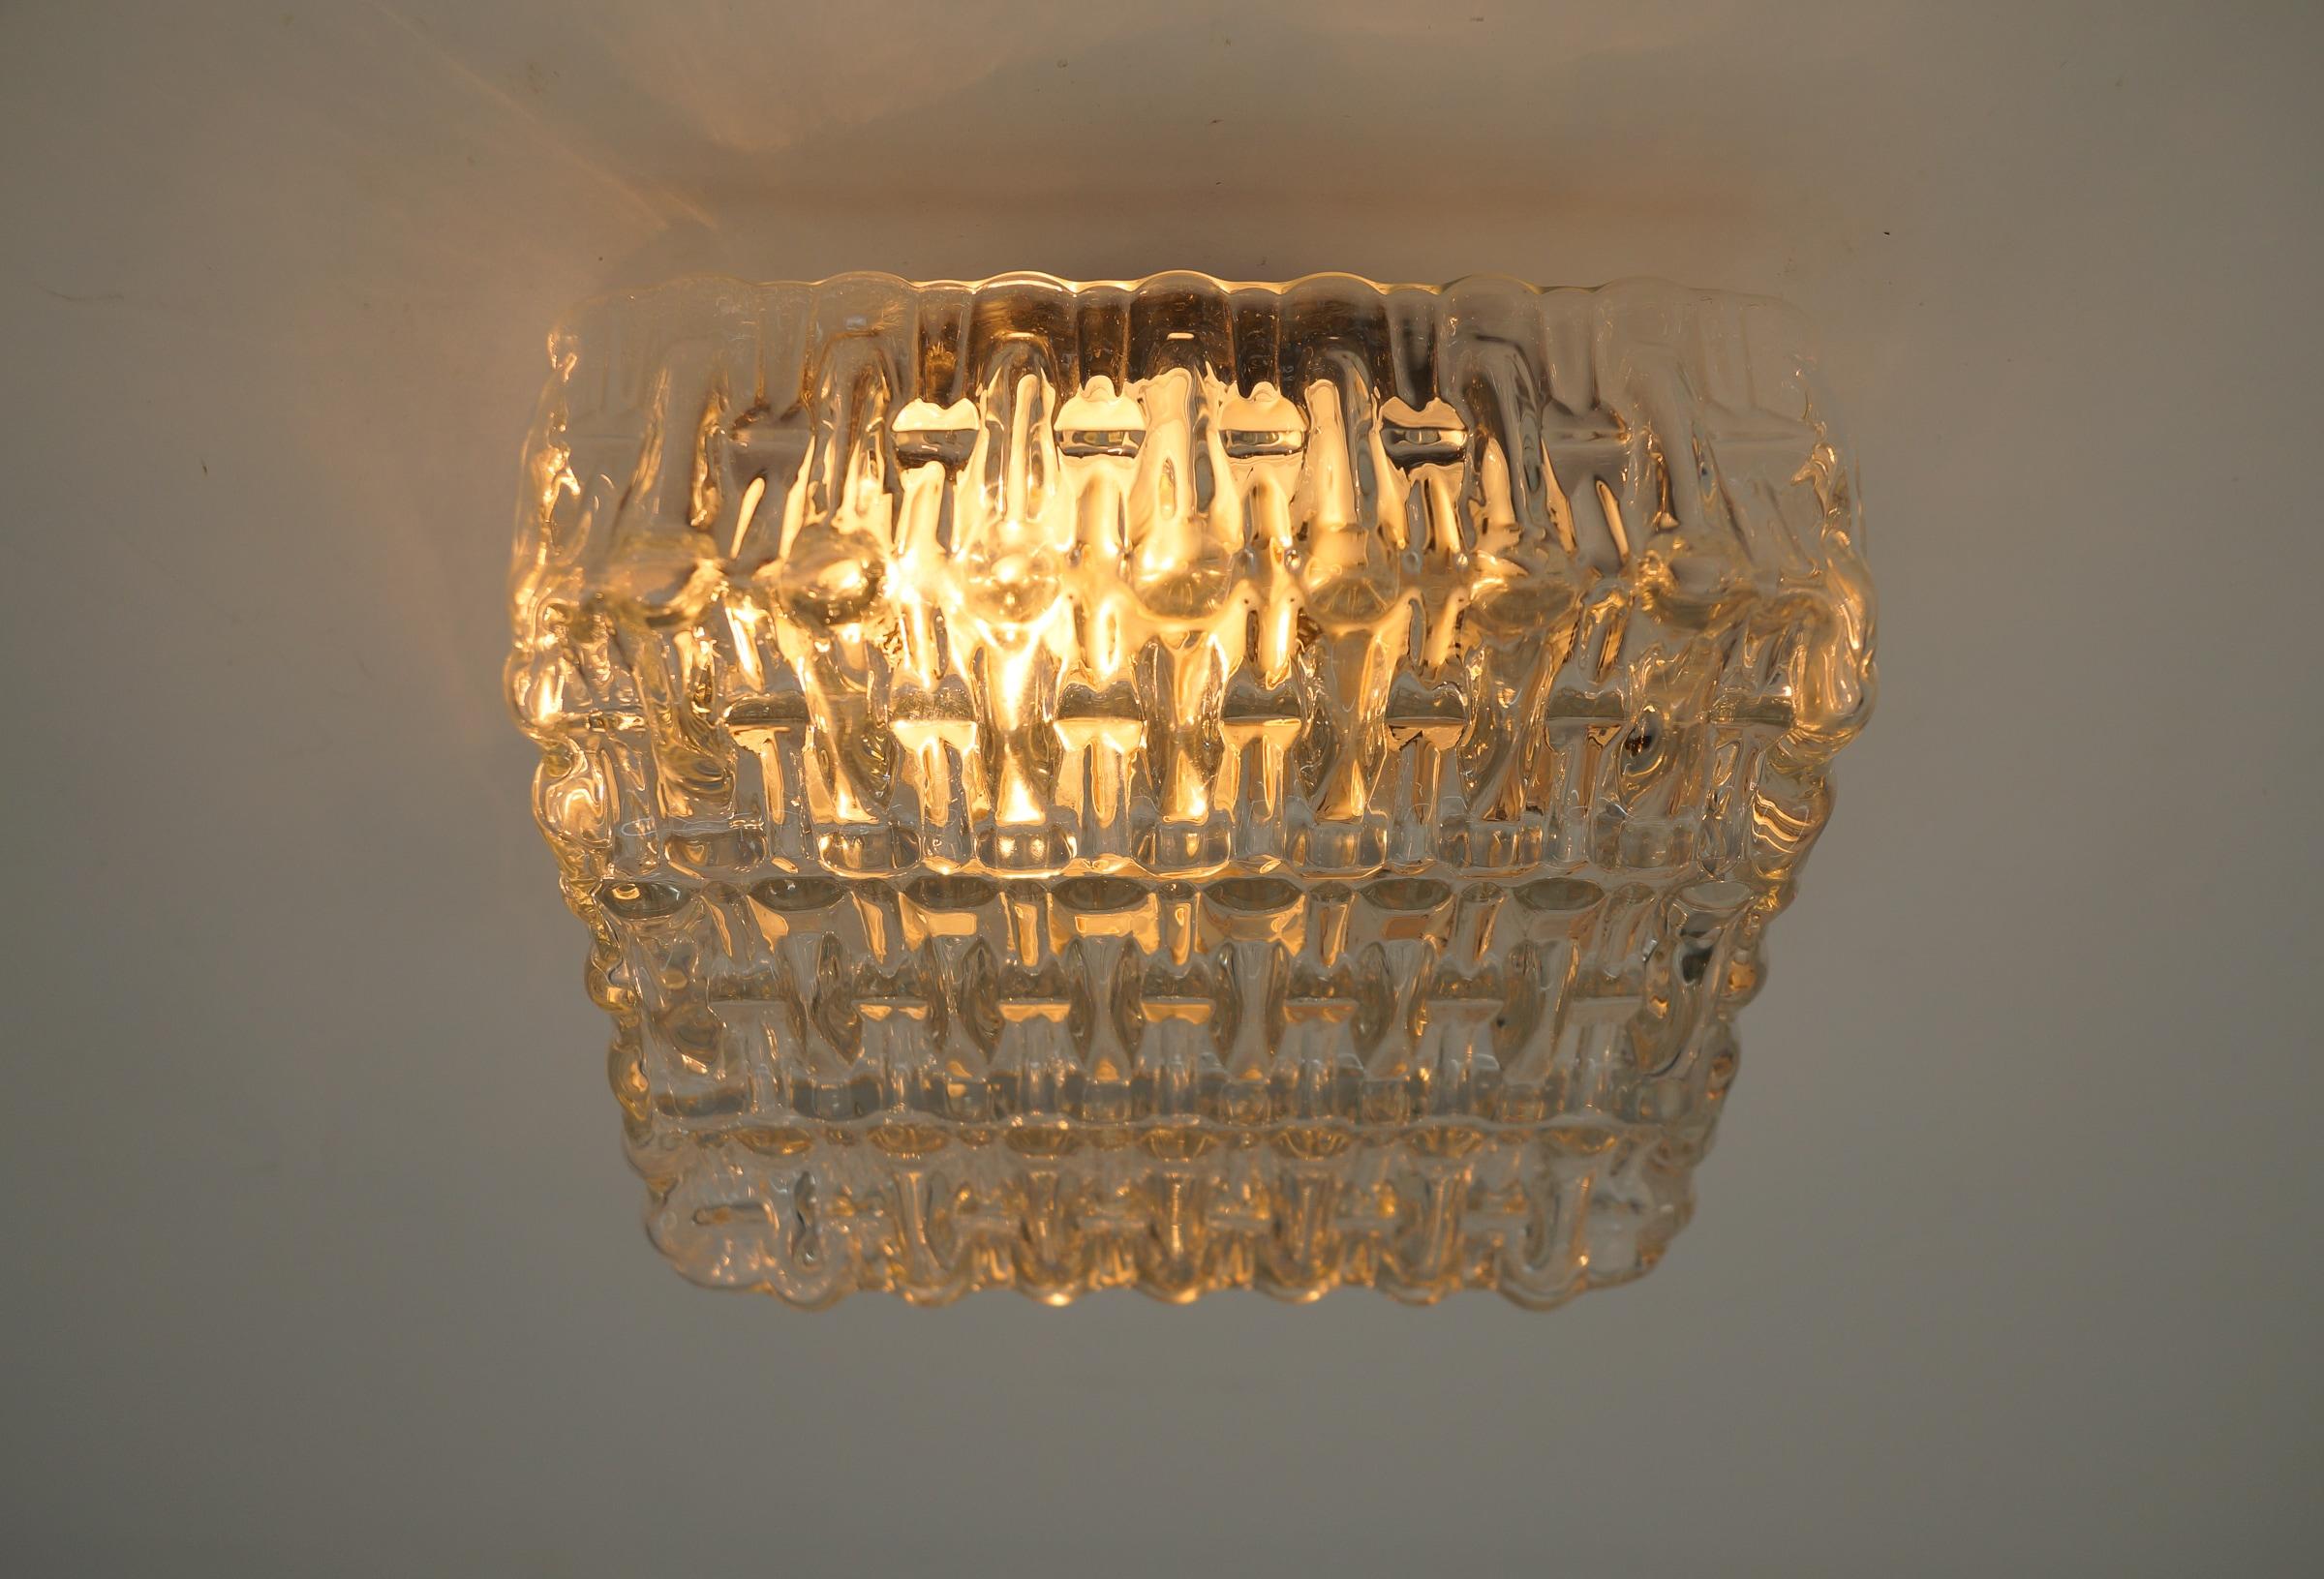 Square Sctructered Heavy Glass Flush Mount Light or Wall Lamp, 1960s For Sale 4